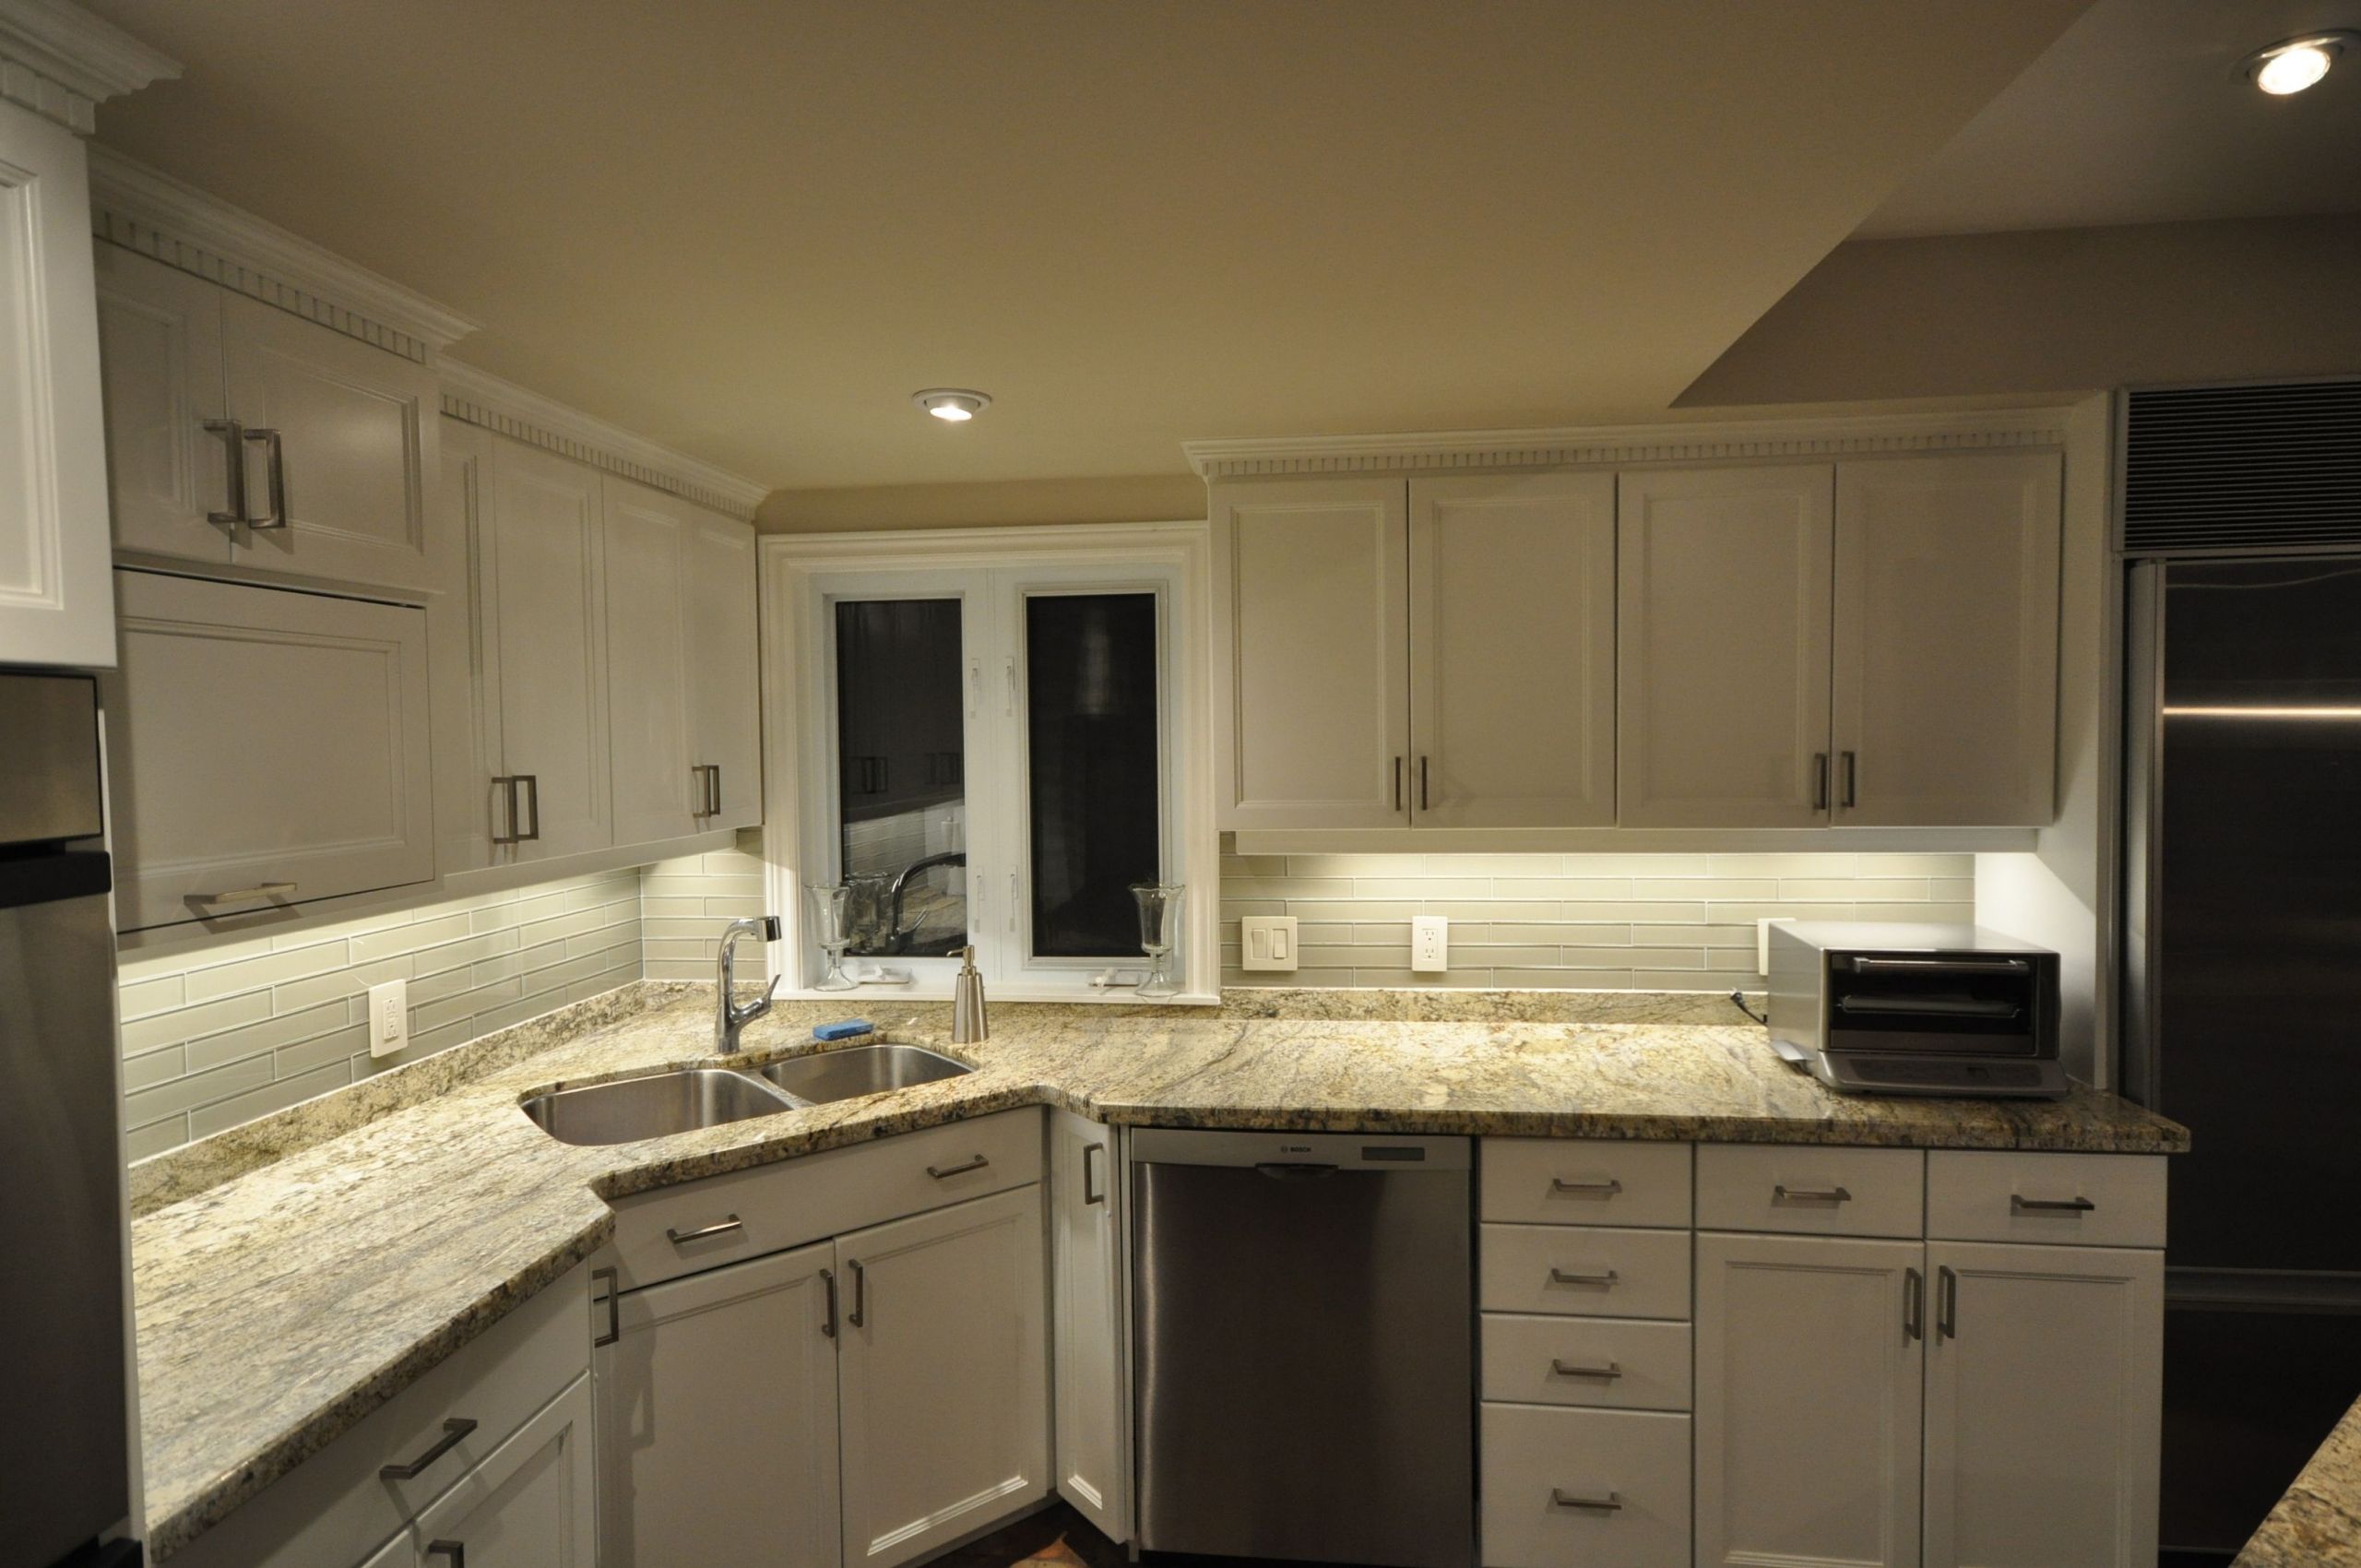 Led Lighting For Kitchen Cabinets
 Pin on Under cabinet lighting projects